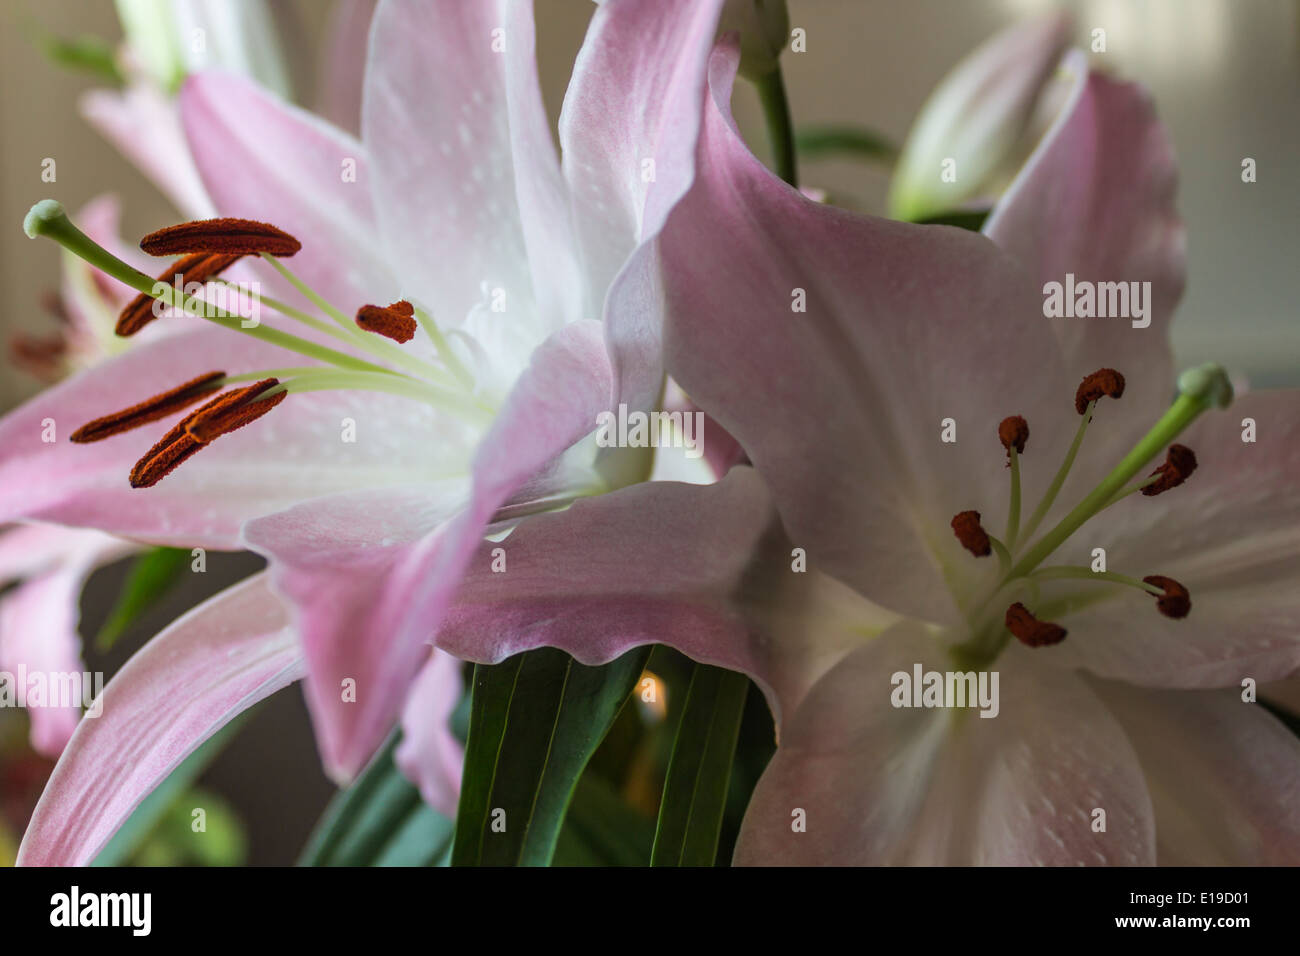 Close up of white and pink lilies Stock Photo